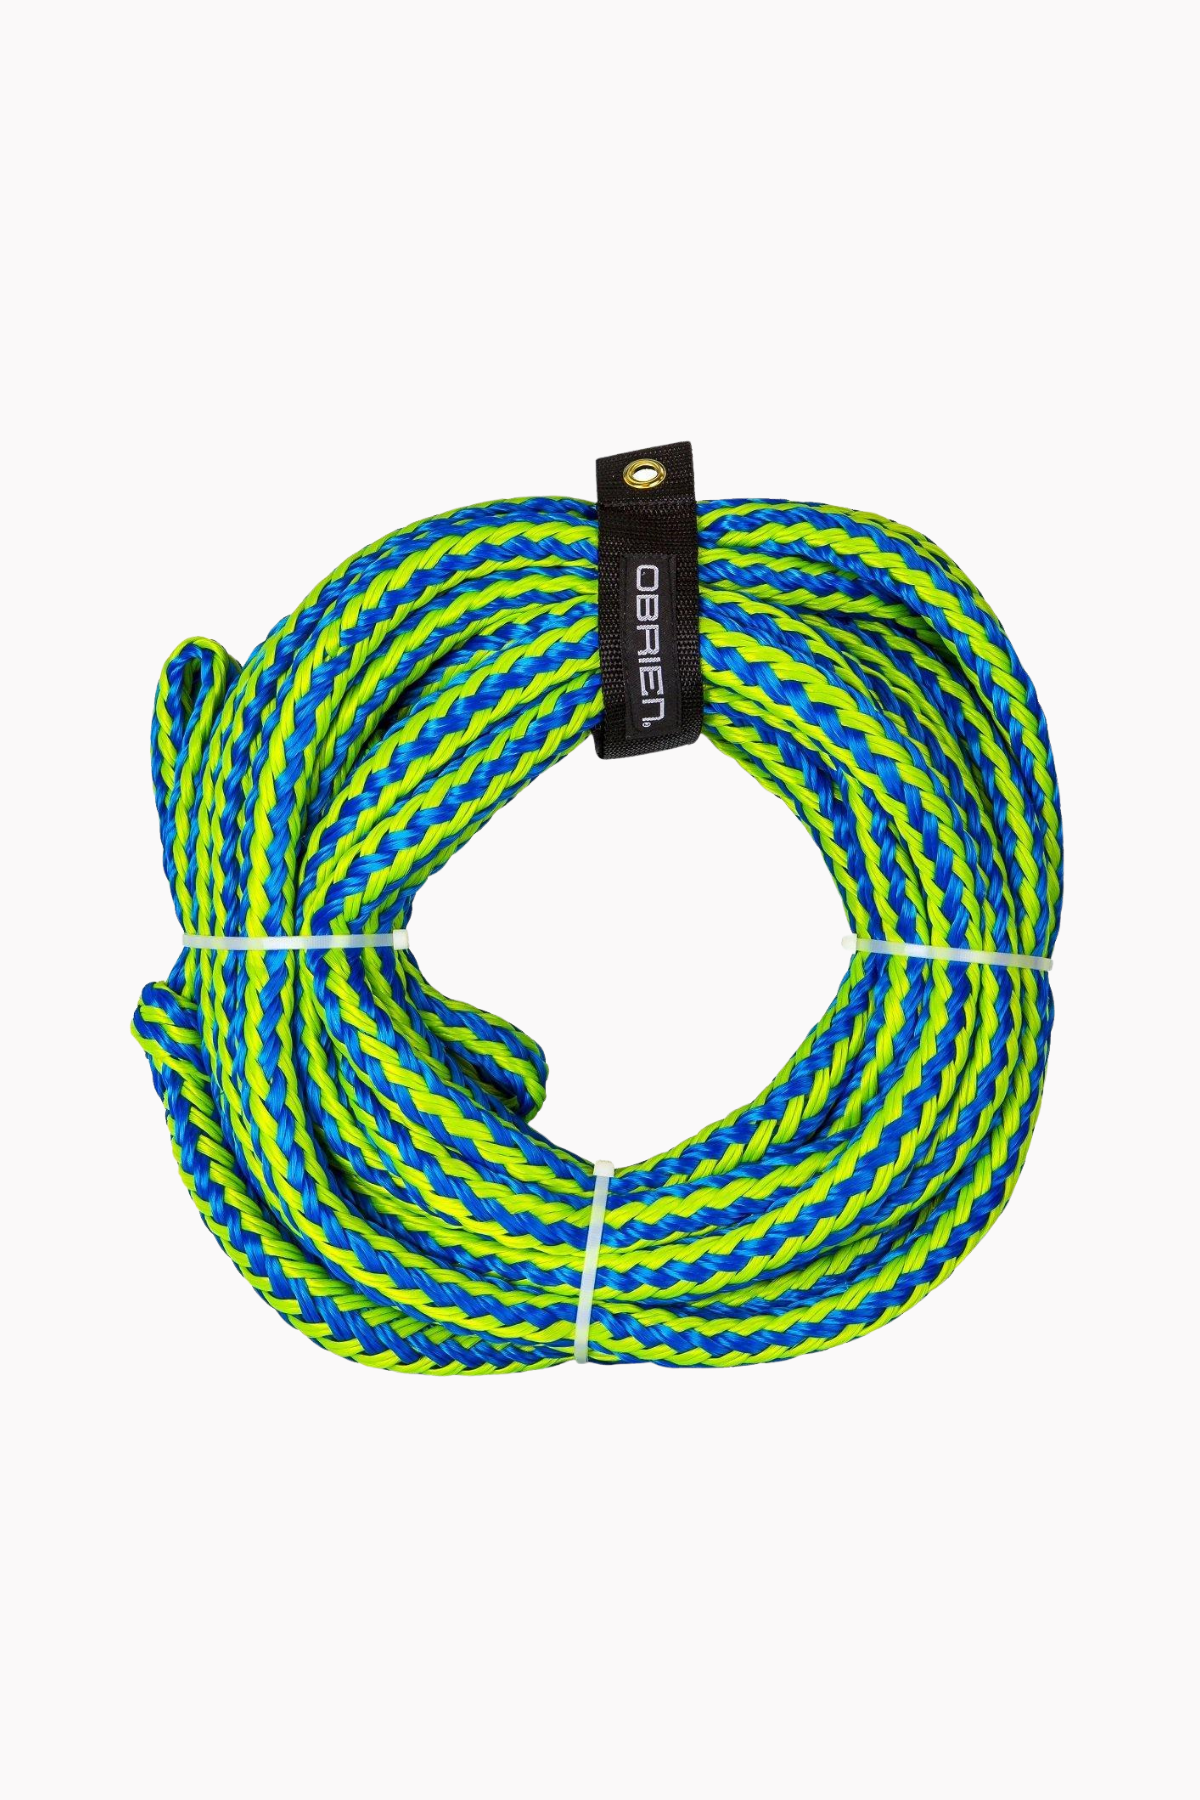 OBRIEN 6 PERSON TOW ROPE • Page 11 of 26 • COTTAGE TOYS ONLINE – Cottage  Toys